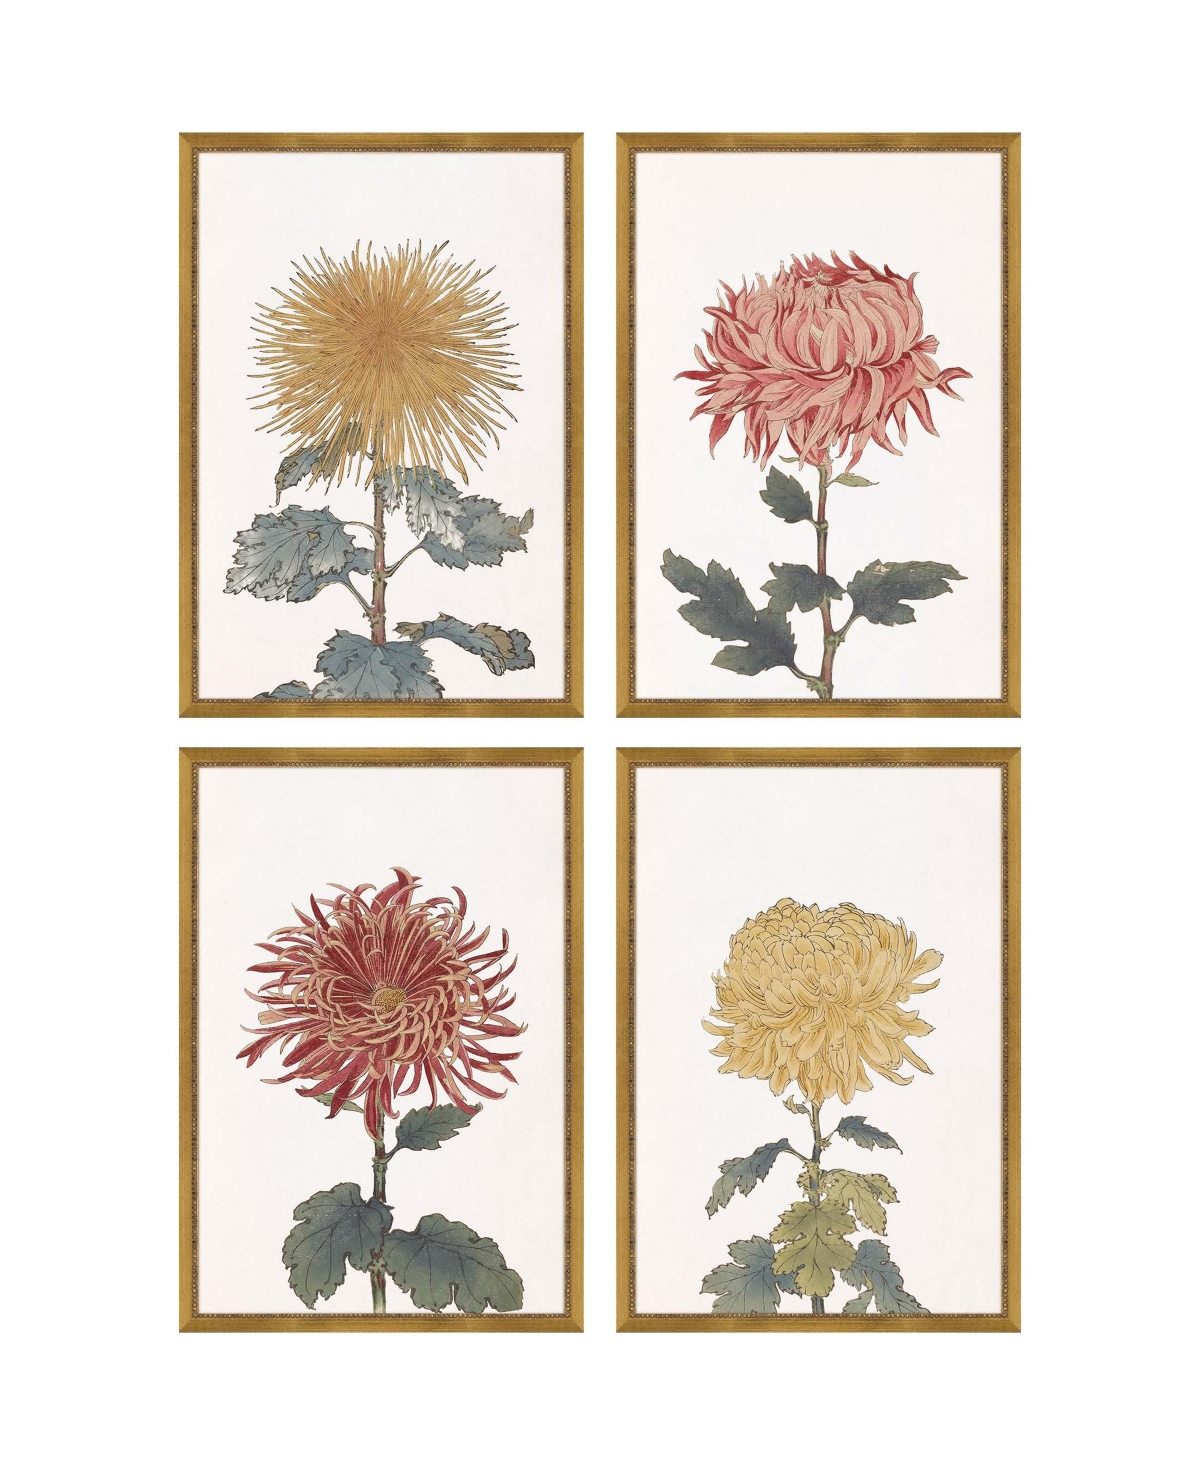 Paragon Picture Gallery Chrysanthemum Framed Art, Set Of 4 In Green